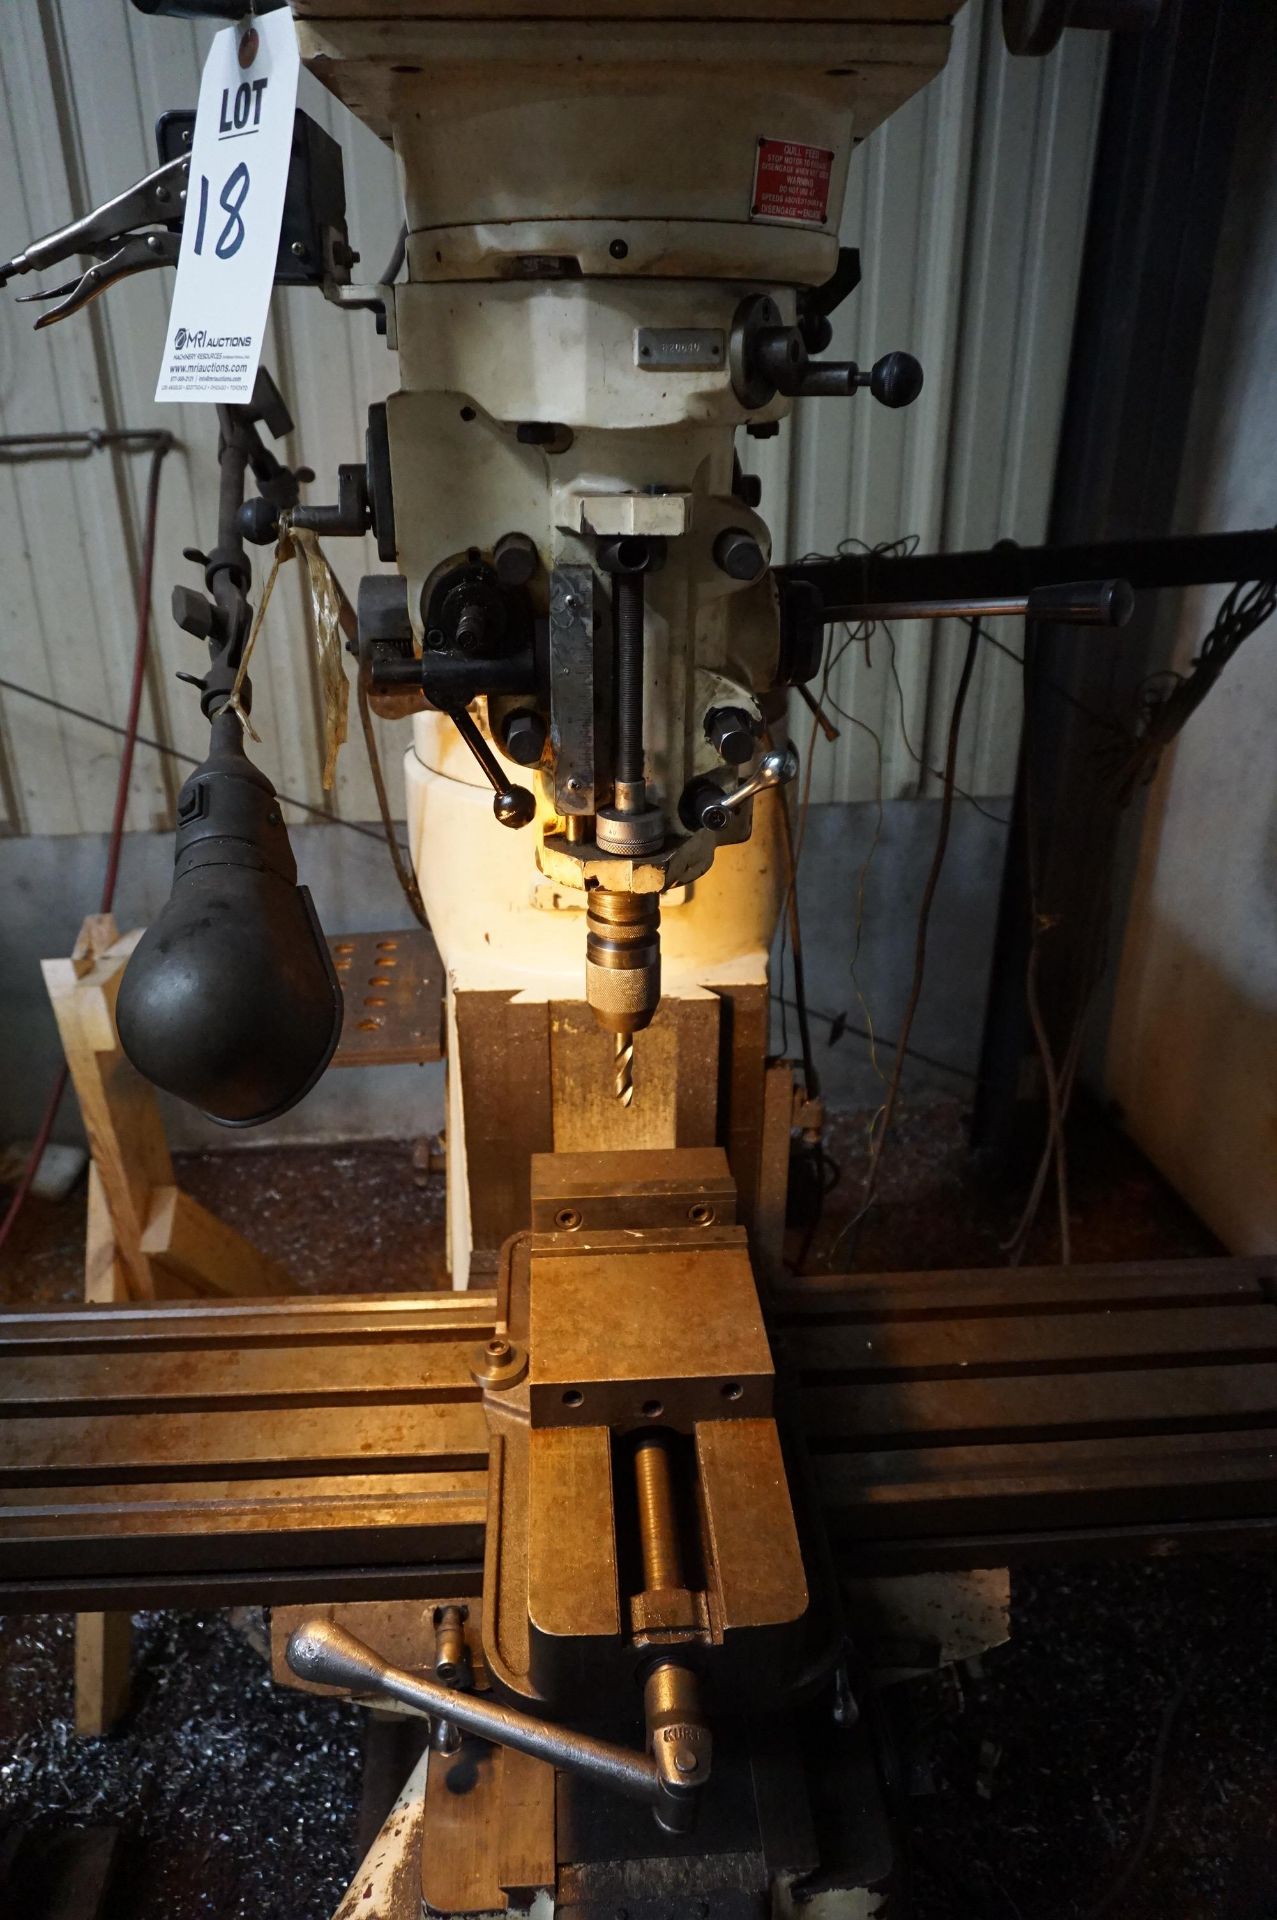 JET MANUAL KNEE MILL S/N 820640 WITH MITUTOYO DIGITAL READOUT, KURT 6" MACHINE VISE, AND ROTARY - Image 2 of 9